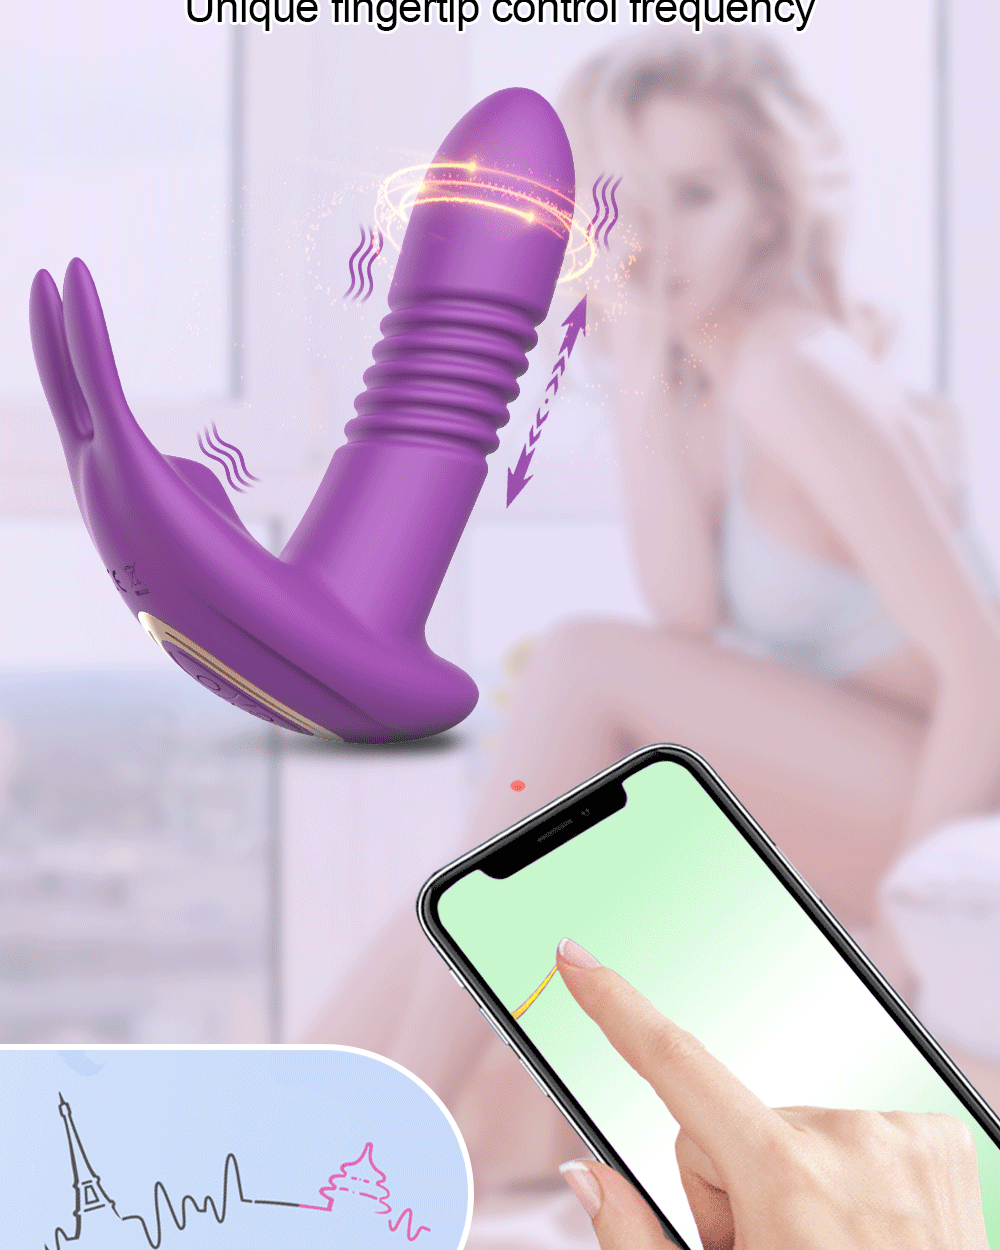 Anywhere Remote Controlled Thruster  LAVAH LINGERIE & INTIMATES   